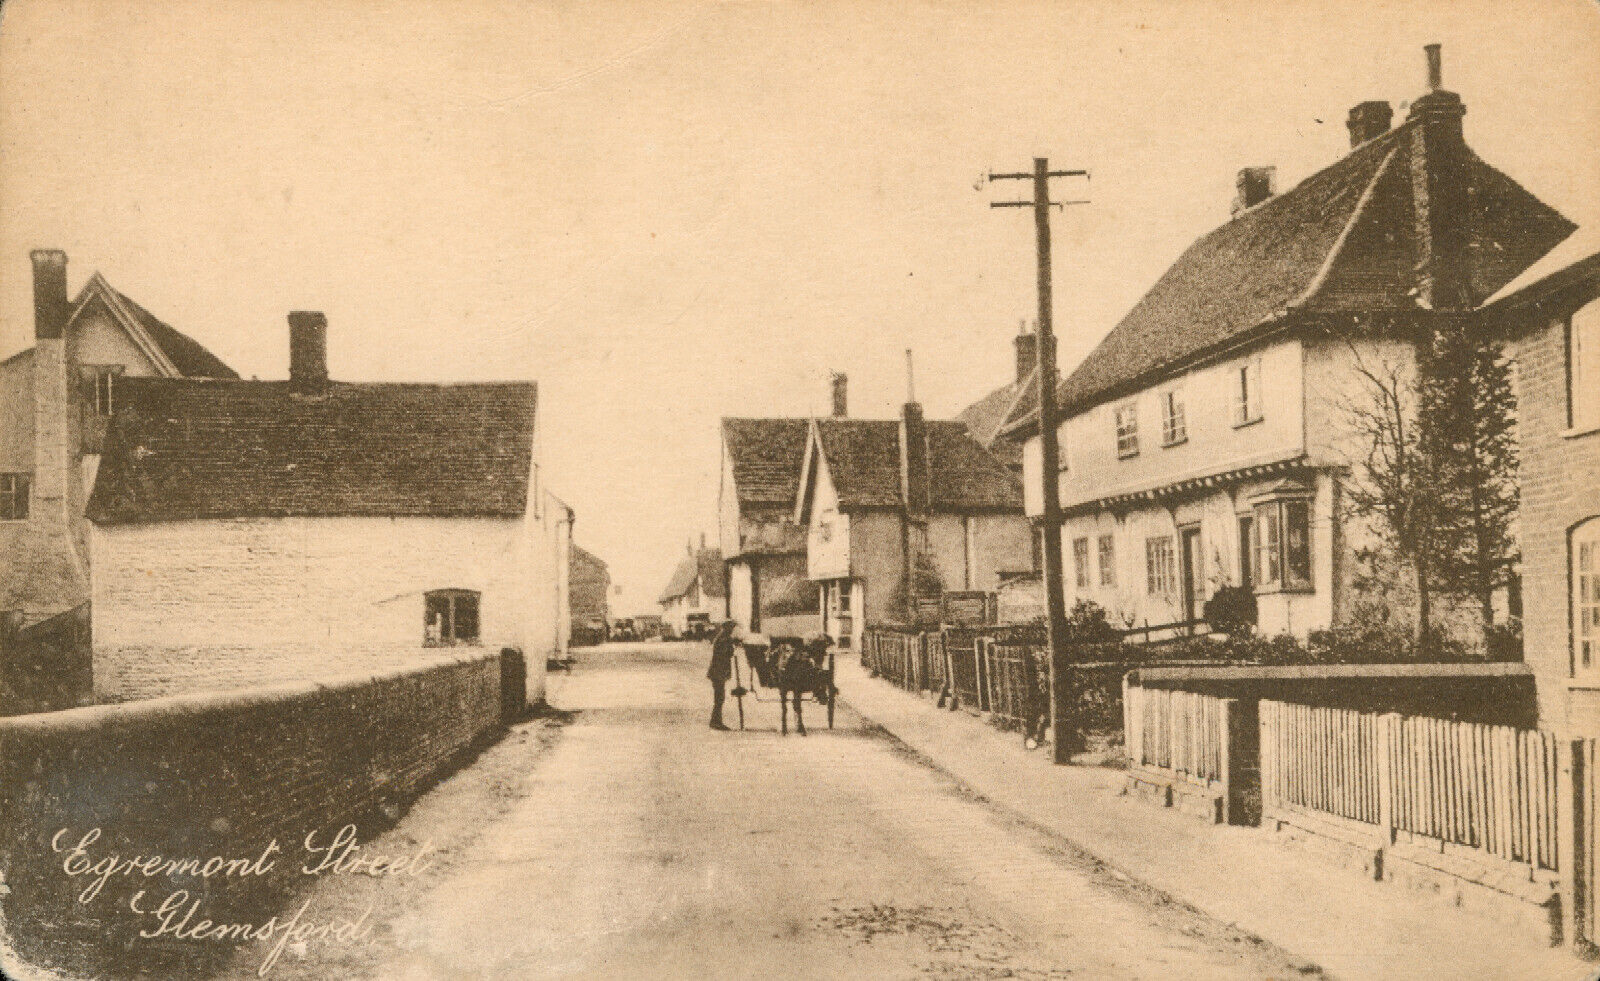 House Clearance - EGREMONT STREET, GLEMSFORD, SUFFOLK, c1923 nr Long Melford, Sudbury & Clare